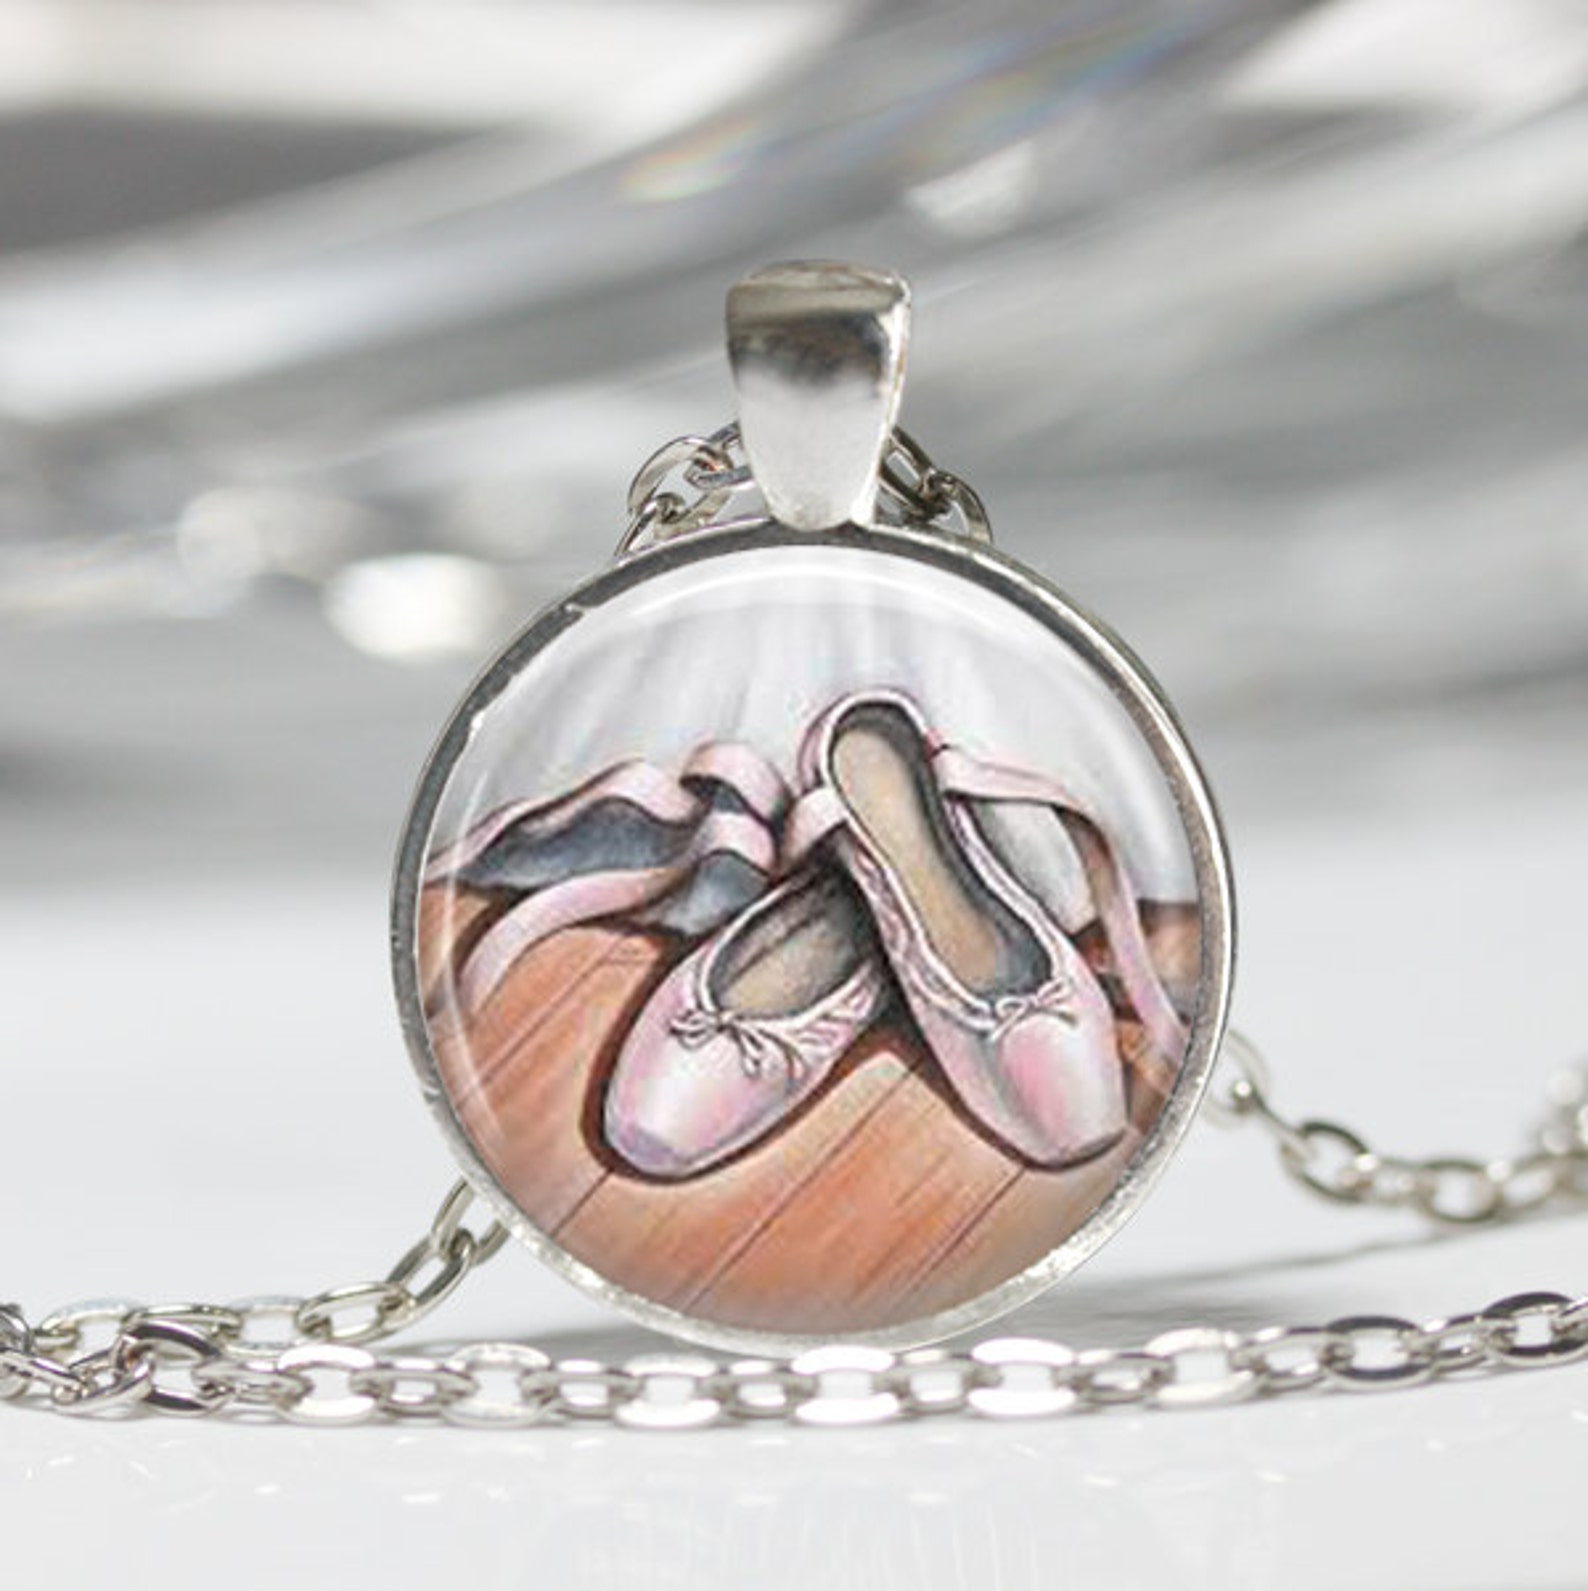 ballet necklace dance jewelry pink ballerina slippers dancer art pendant in bronze or silver with link chain included